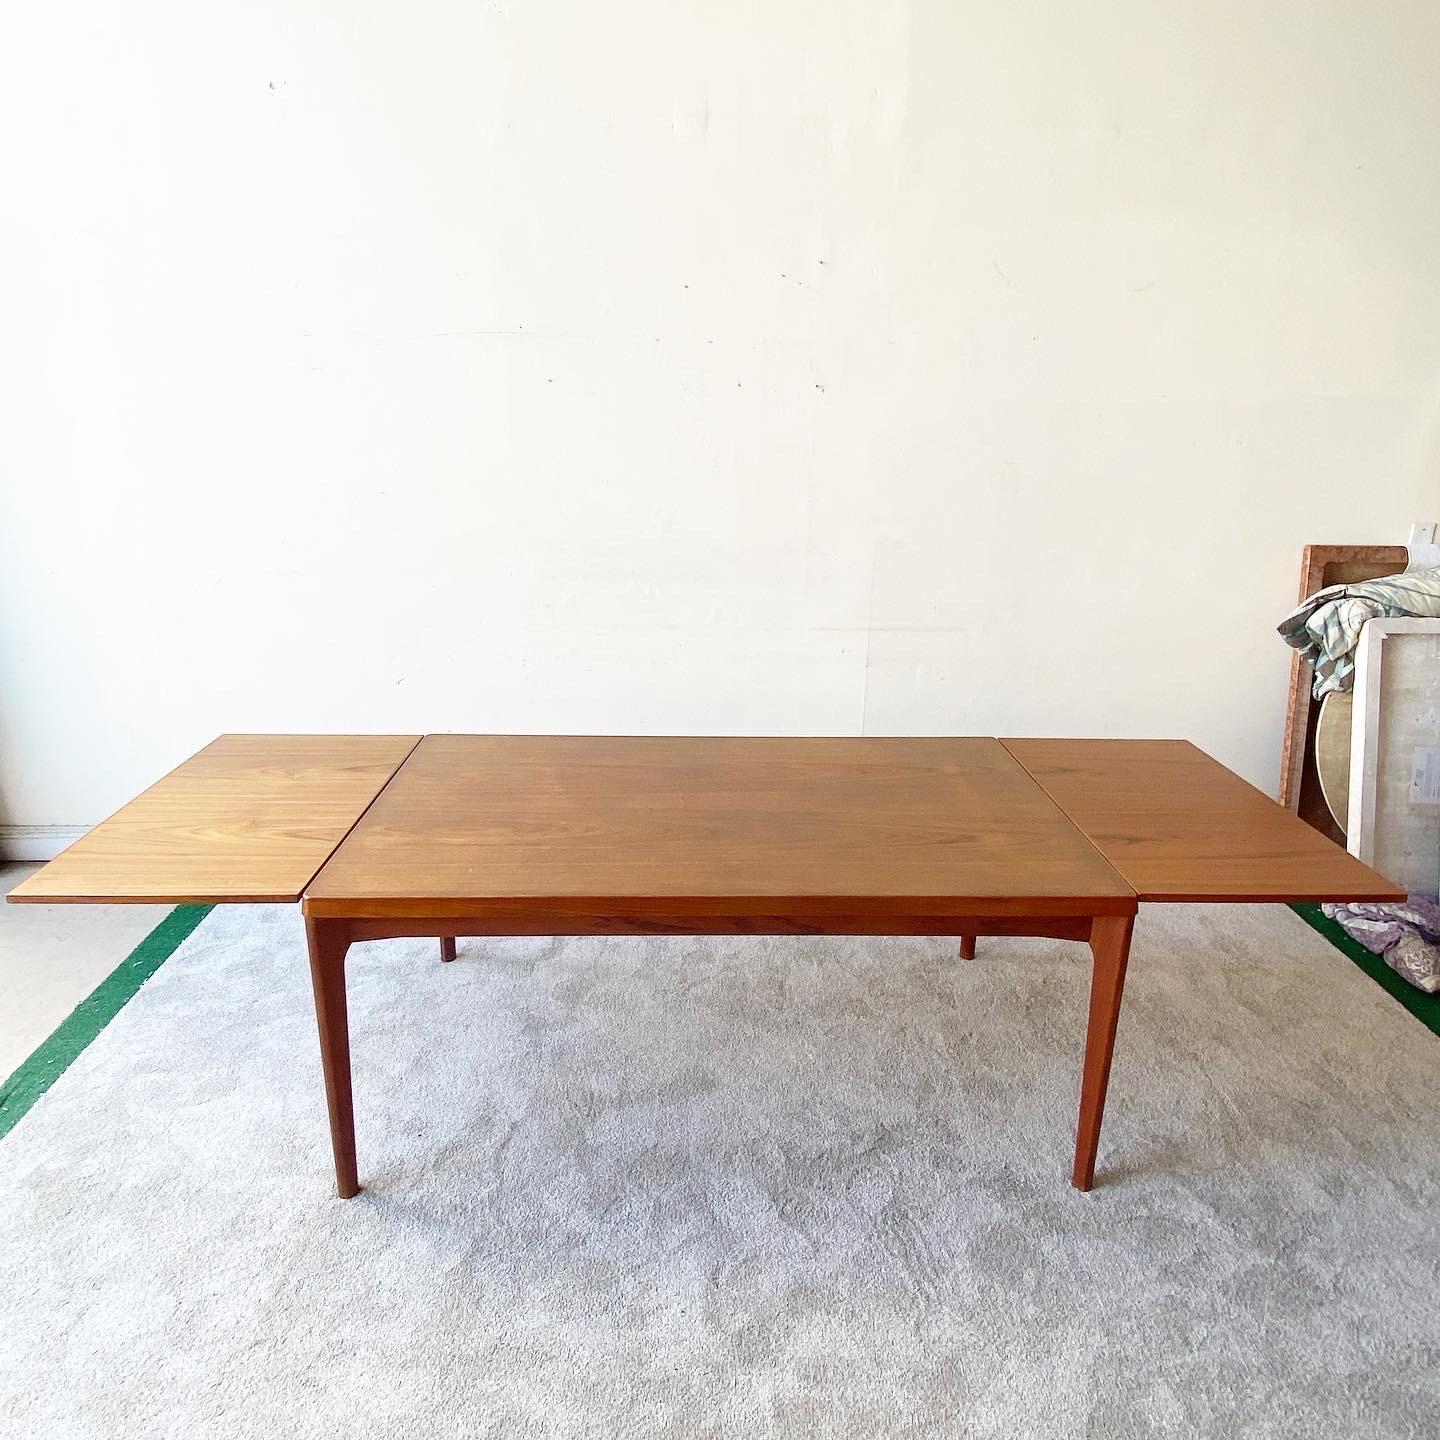 Outstanding vintage Scandinavian Modern teak veneer extension dining table by Henning Kjaernulf for Vejle Stole Mobelfabrik. Features two extension leaves which slide out from underneath the table top. Circa, 1960’s.

Two leaves. Each leaf